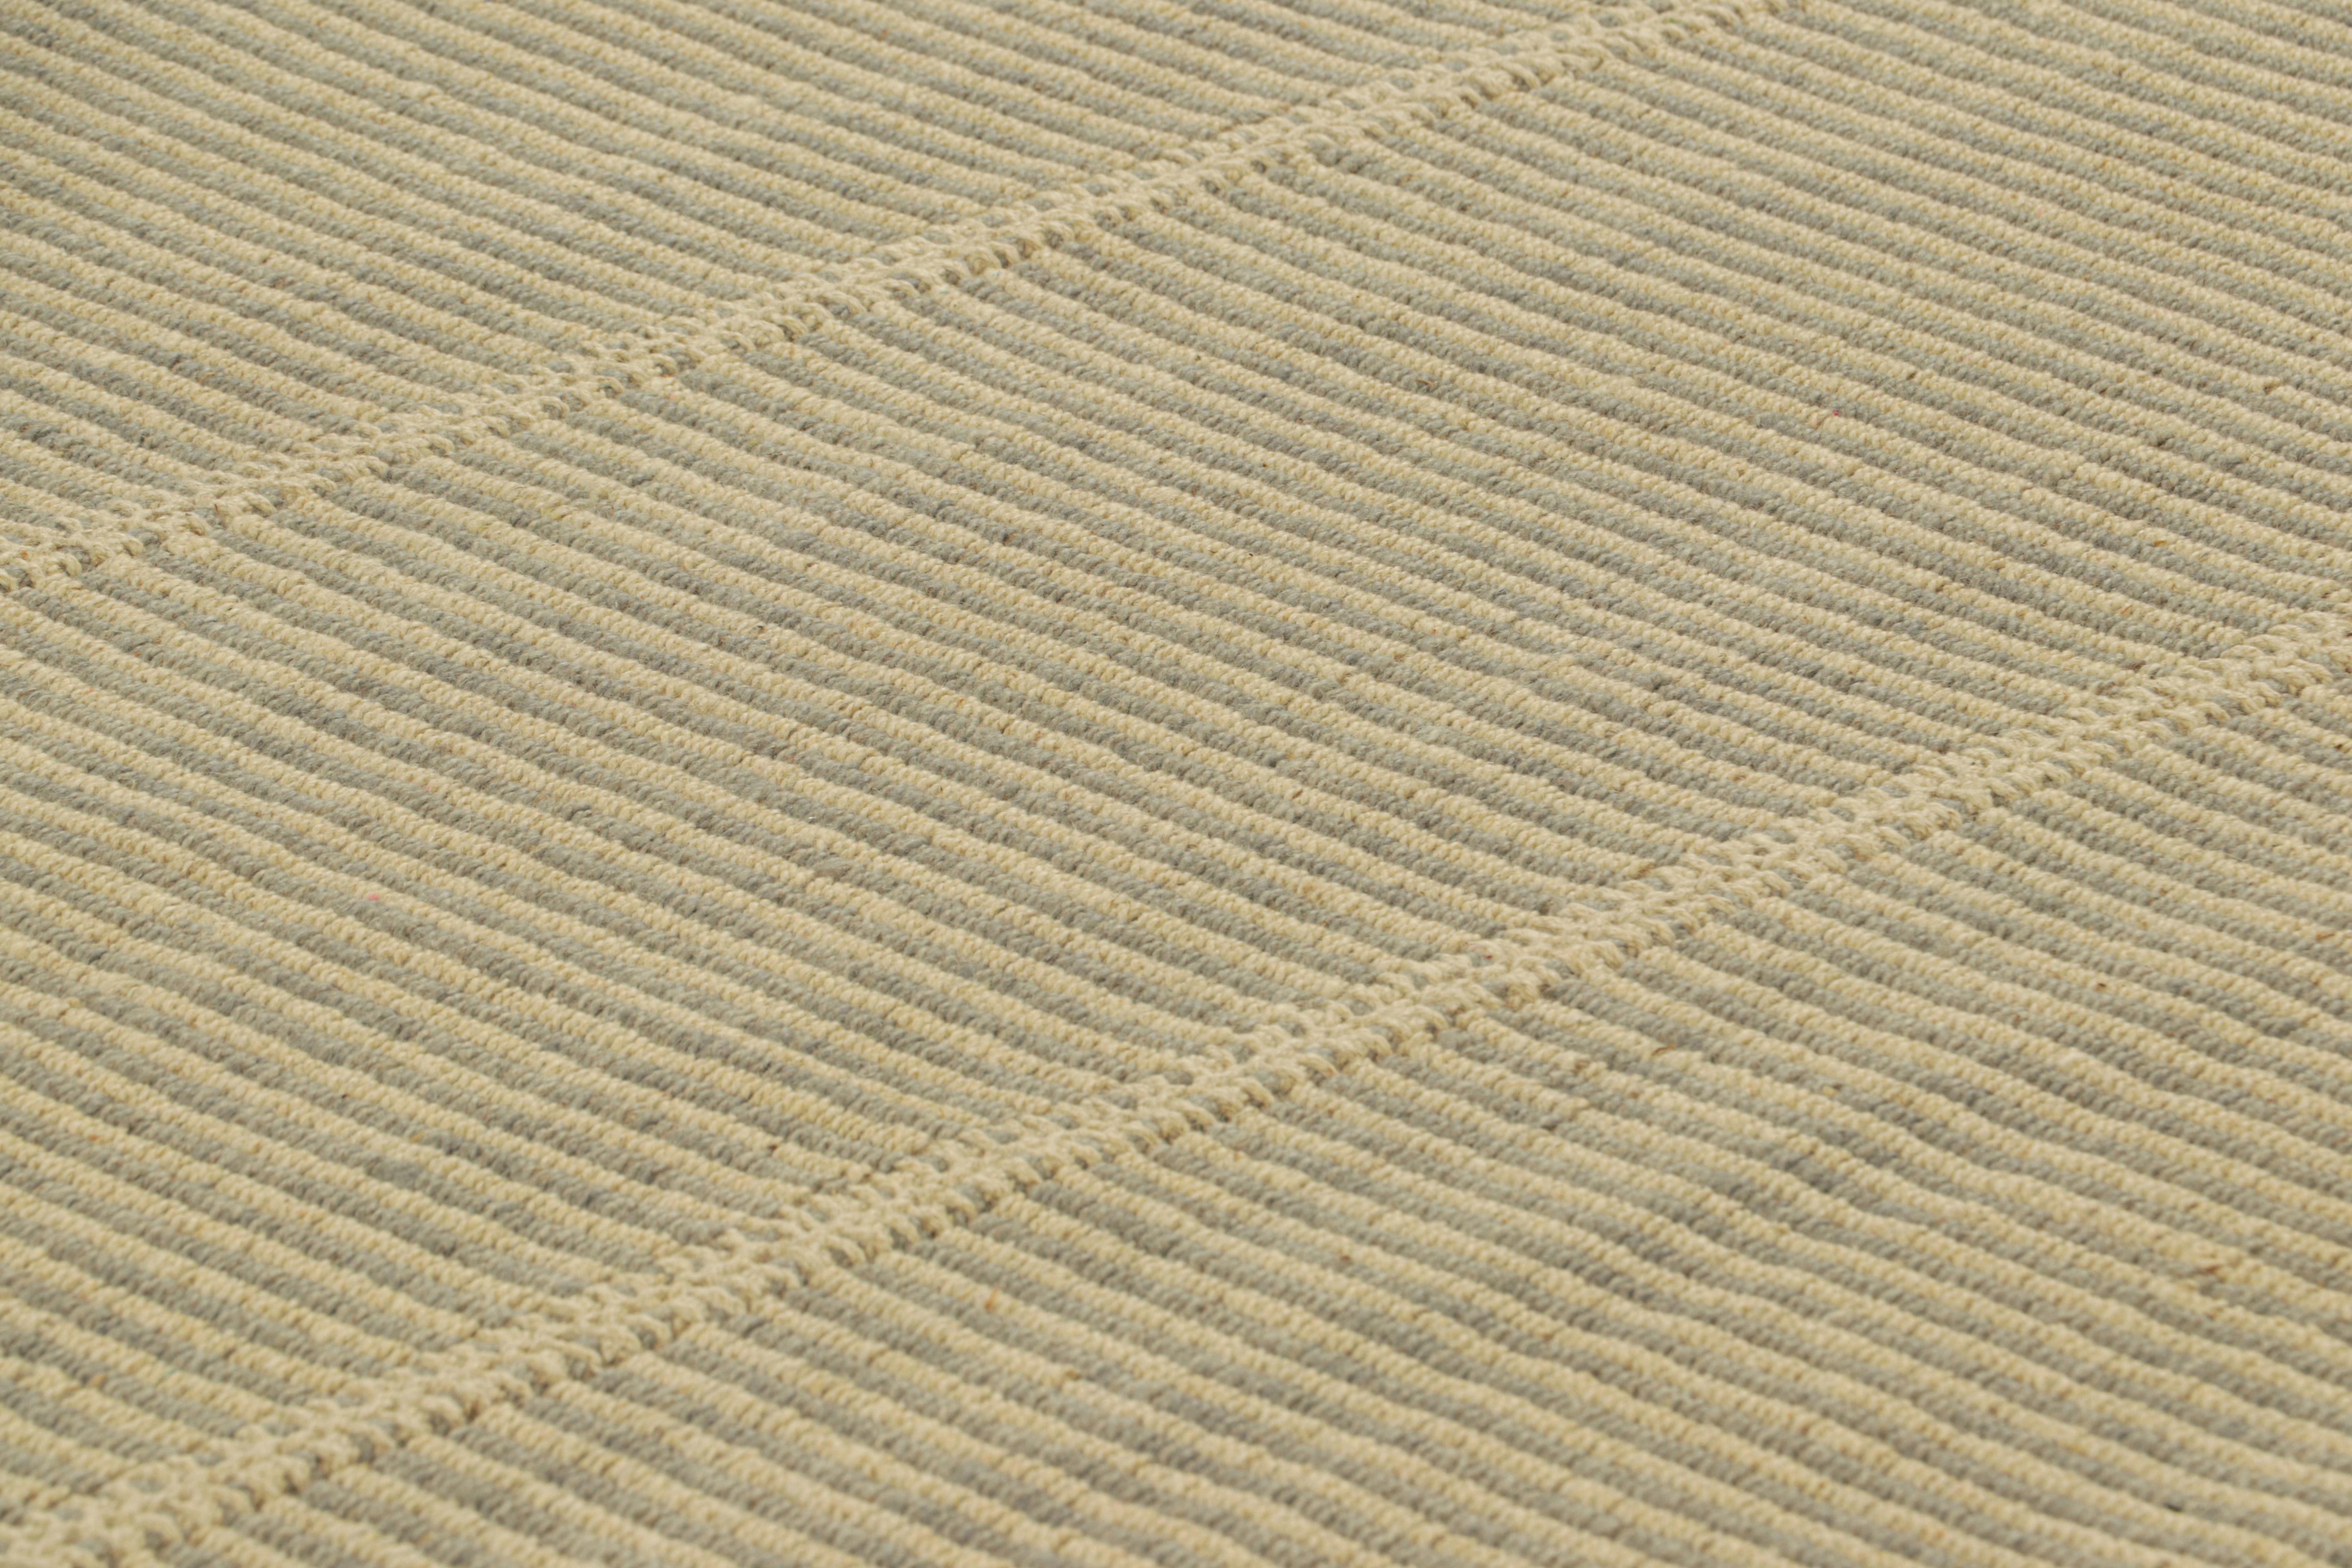 Handwoven in wool, this 8x10 Kilim is from an inventive new contemporary flat weave collection by Rug & Kilim.

On the Design: 

Fondly dubbed, “Rez Kilims”, this modern take on classic panel-weaving enjoys a fabulous, unique play of beige and light